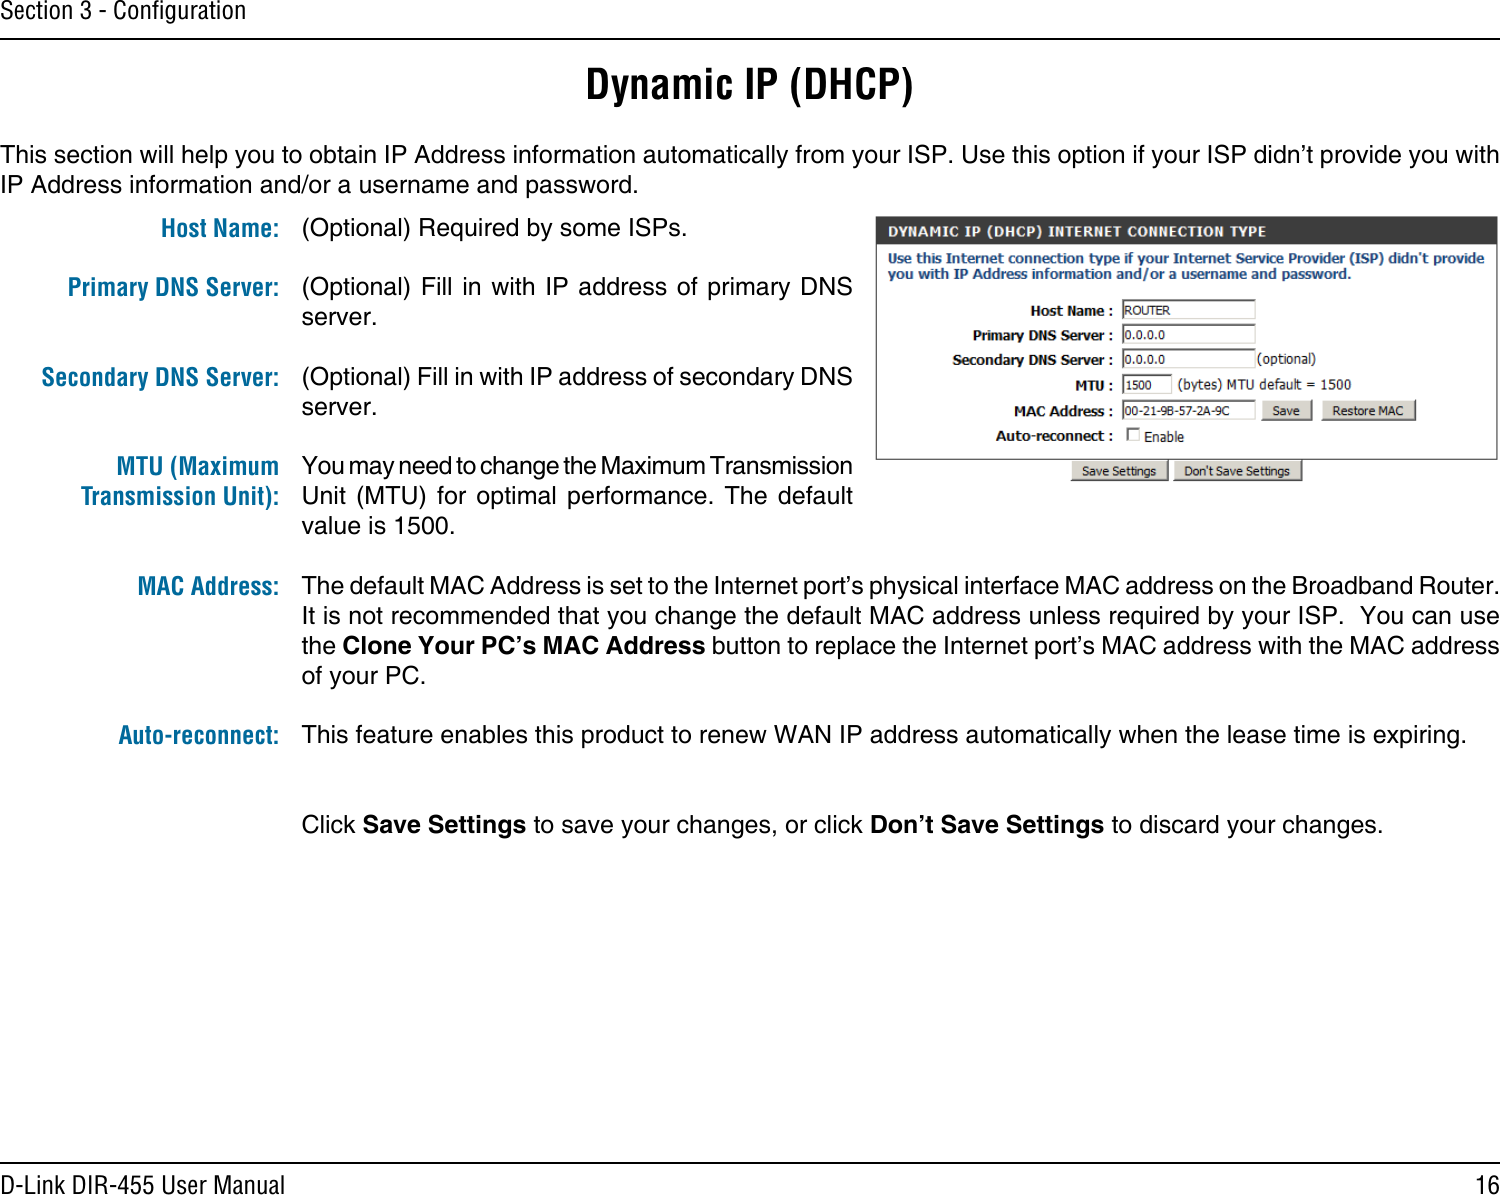 16D-Link DIR-455 User ManualSection 3 - ConﬁgurationDynamic IP (DHCP)(Optional) Required by some ISPs.(Optional) Fill in with IP address of primary DNS server.(Optional) Fill in with IP address of secondary DNS server.You may need to change the Maximum Transmission Unit  (MTU)  for  optimal  performance.  The  default value is 1500.The default MAC Address is set to the Internet port’s physical interface MAC address on the Broadband Router. It is not recommended that you change the default MAC address unless required by your ISP.  You can use the Clone Your PC’s MAC Address button to replace the Internet port’s MAC address with the MAC address of your PC.This feature enables this product to renew WAN IP address automatically when the lease time is expiring. Click Save Settings to save your changes, or click Don’t Save Settings to discard your changes.This section will help you to obtain IP Address information automatically from your ISP. Use this option if your ISP didn’t provide you with IP Address information and/or a username and password.Host Name:Primary DNS Server: Secondary DNS Server: MTU (Maximum Transmission Unit): MAC Address: Auto-reconnect: